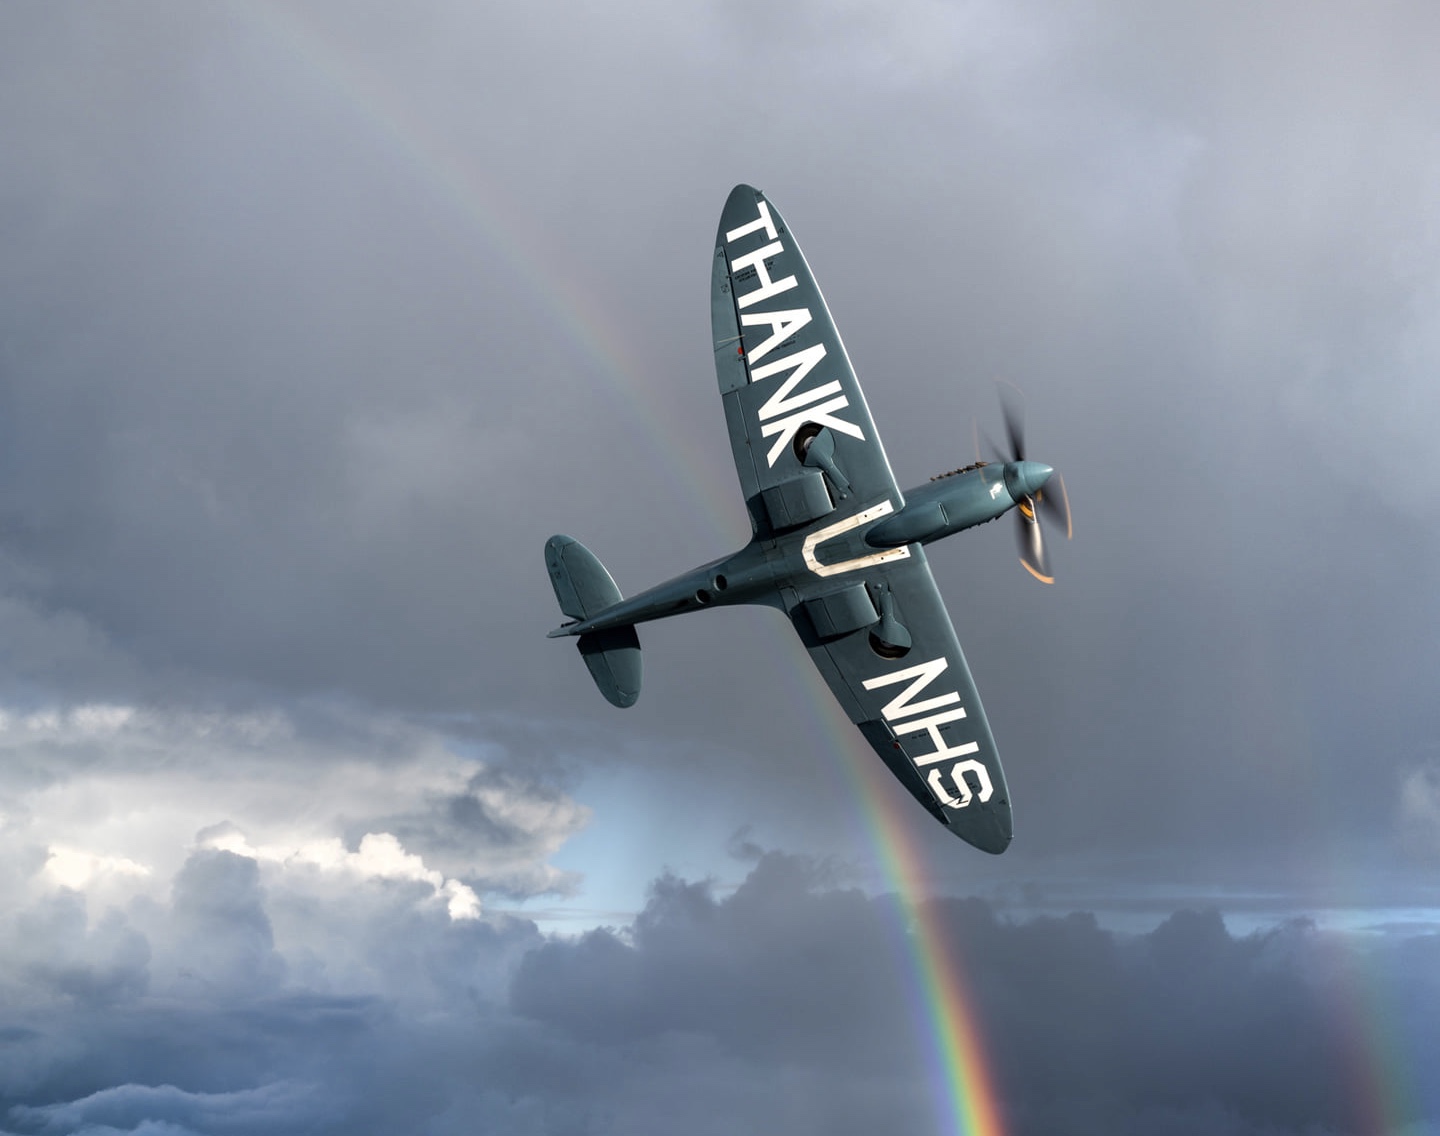 NEWS | Thank You NHS Spitfire to fly over Hereford this morning!